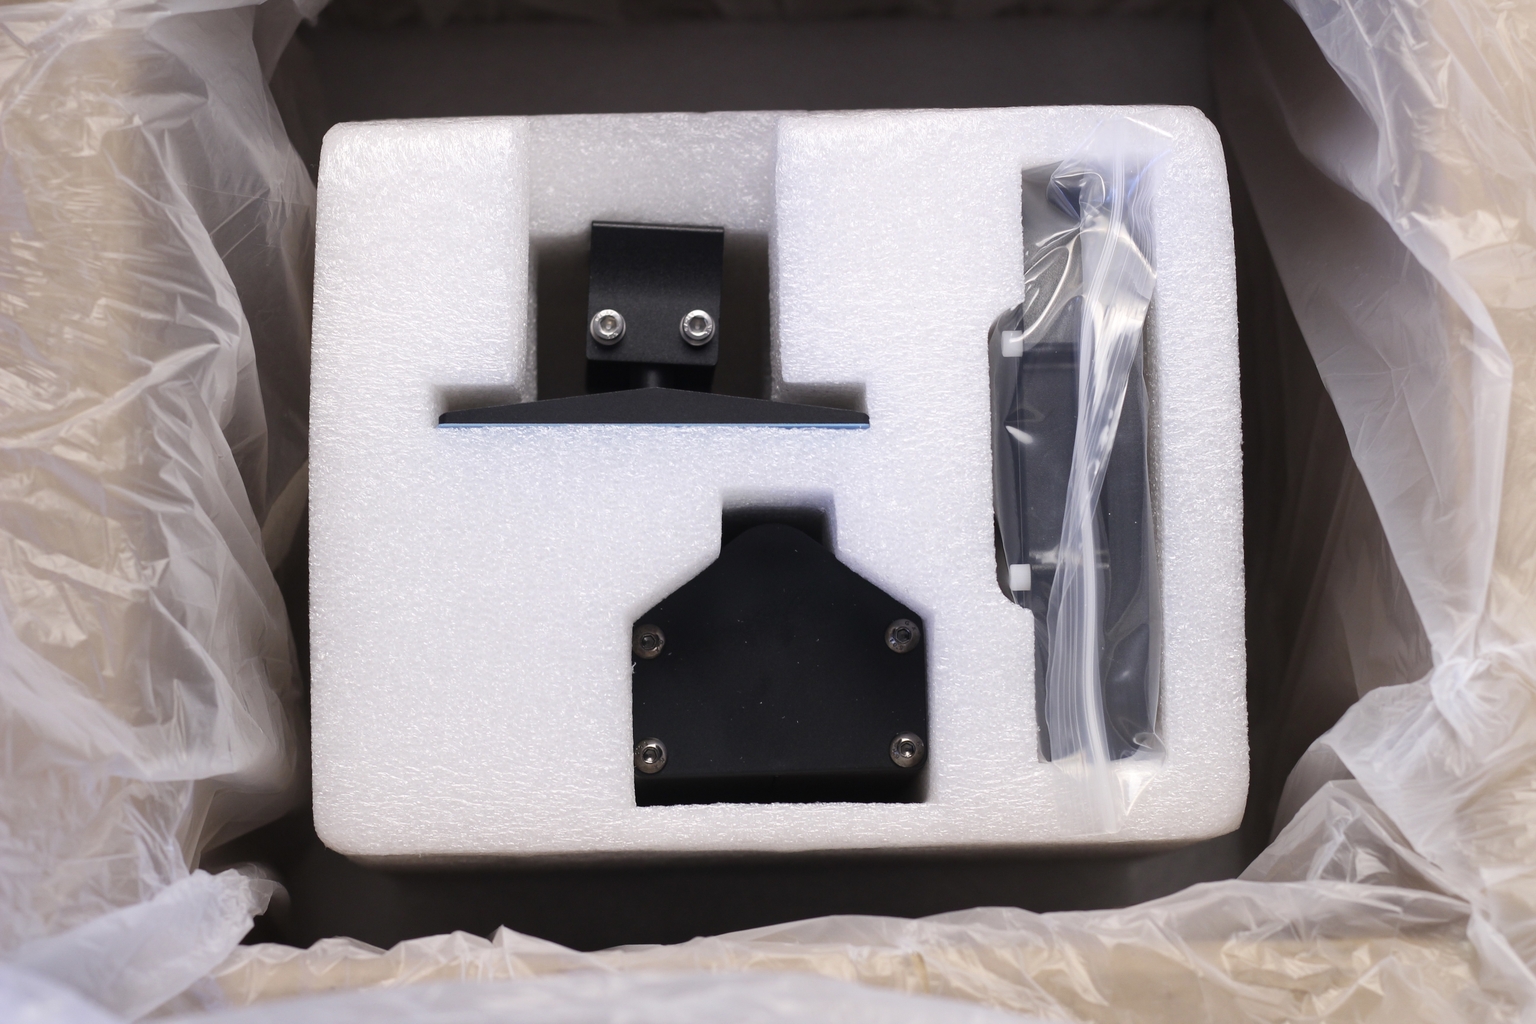 Anycubic Photon M3 Review Packaging3 | Anycubic Photon M3 Review: Bridging the gap